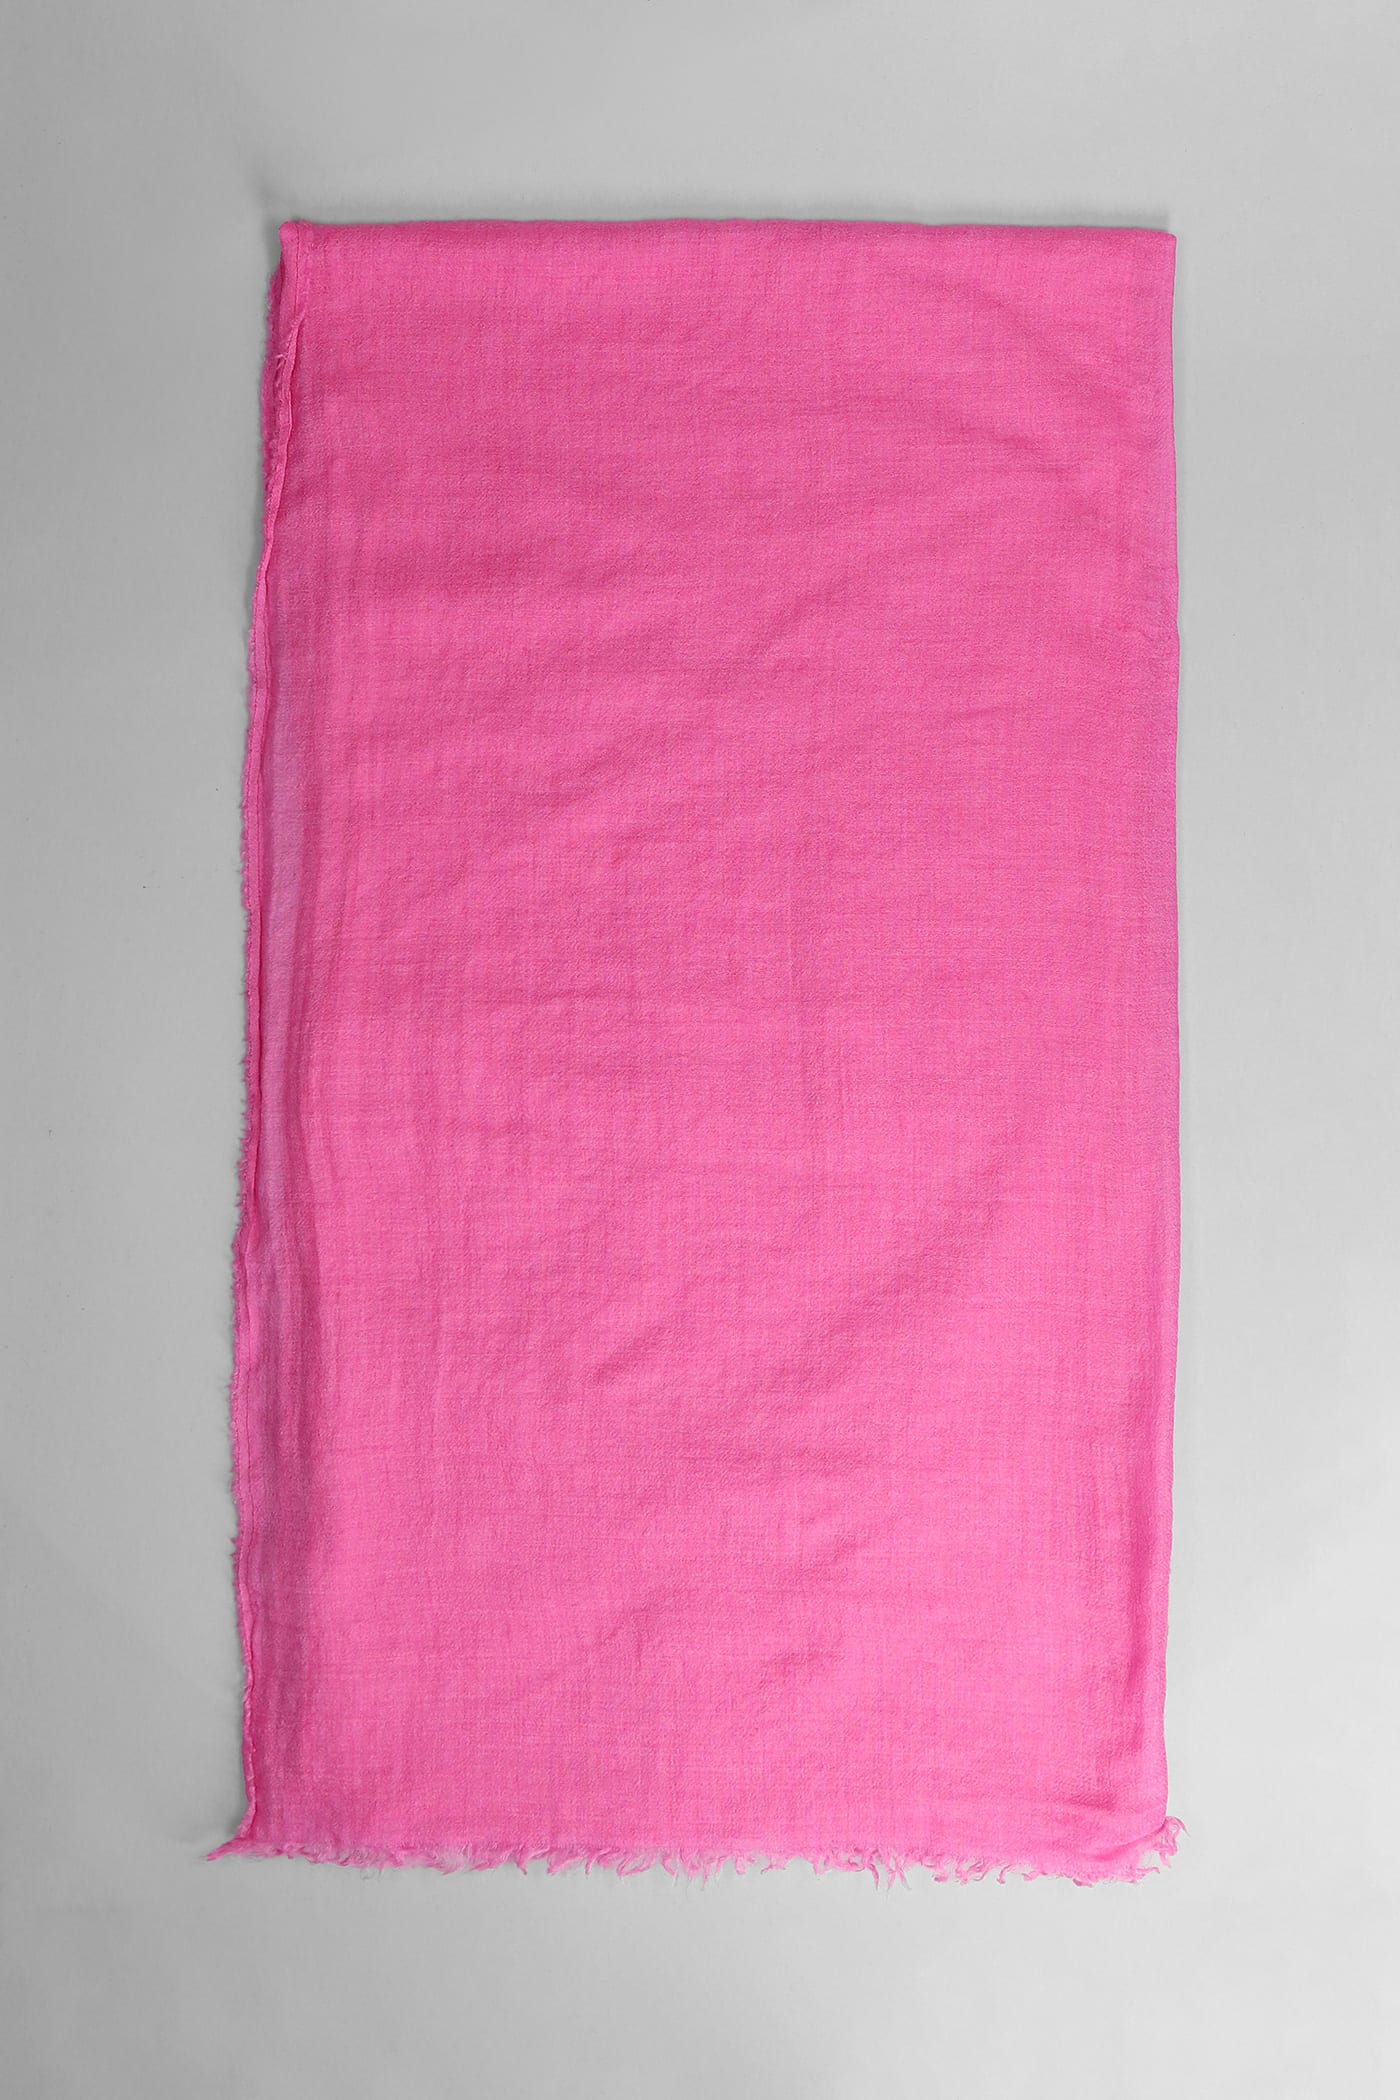 RICK OWENS GINNY SCARVE IN ROSE-PINK CASHMERE